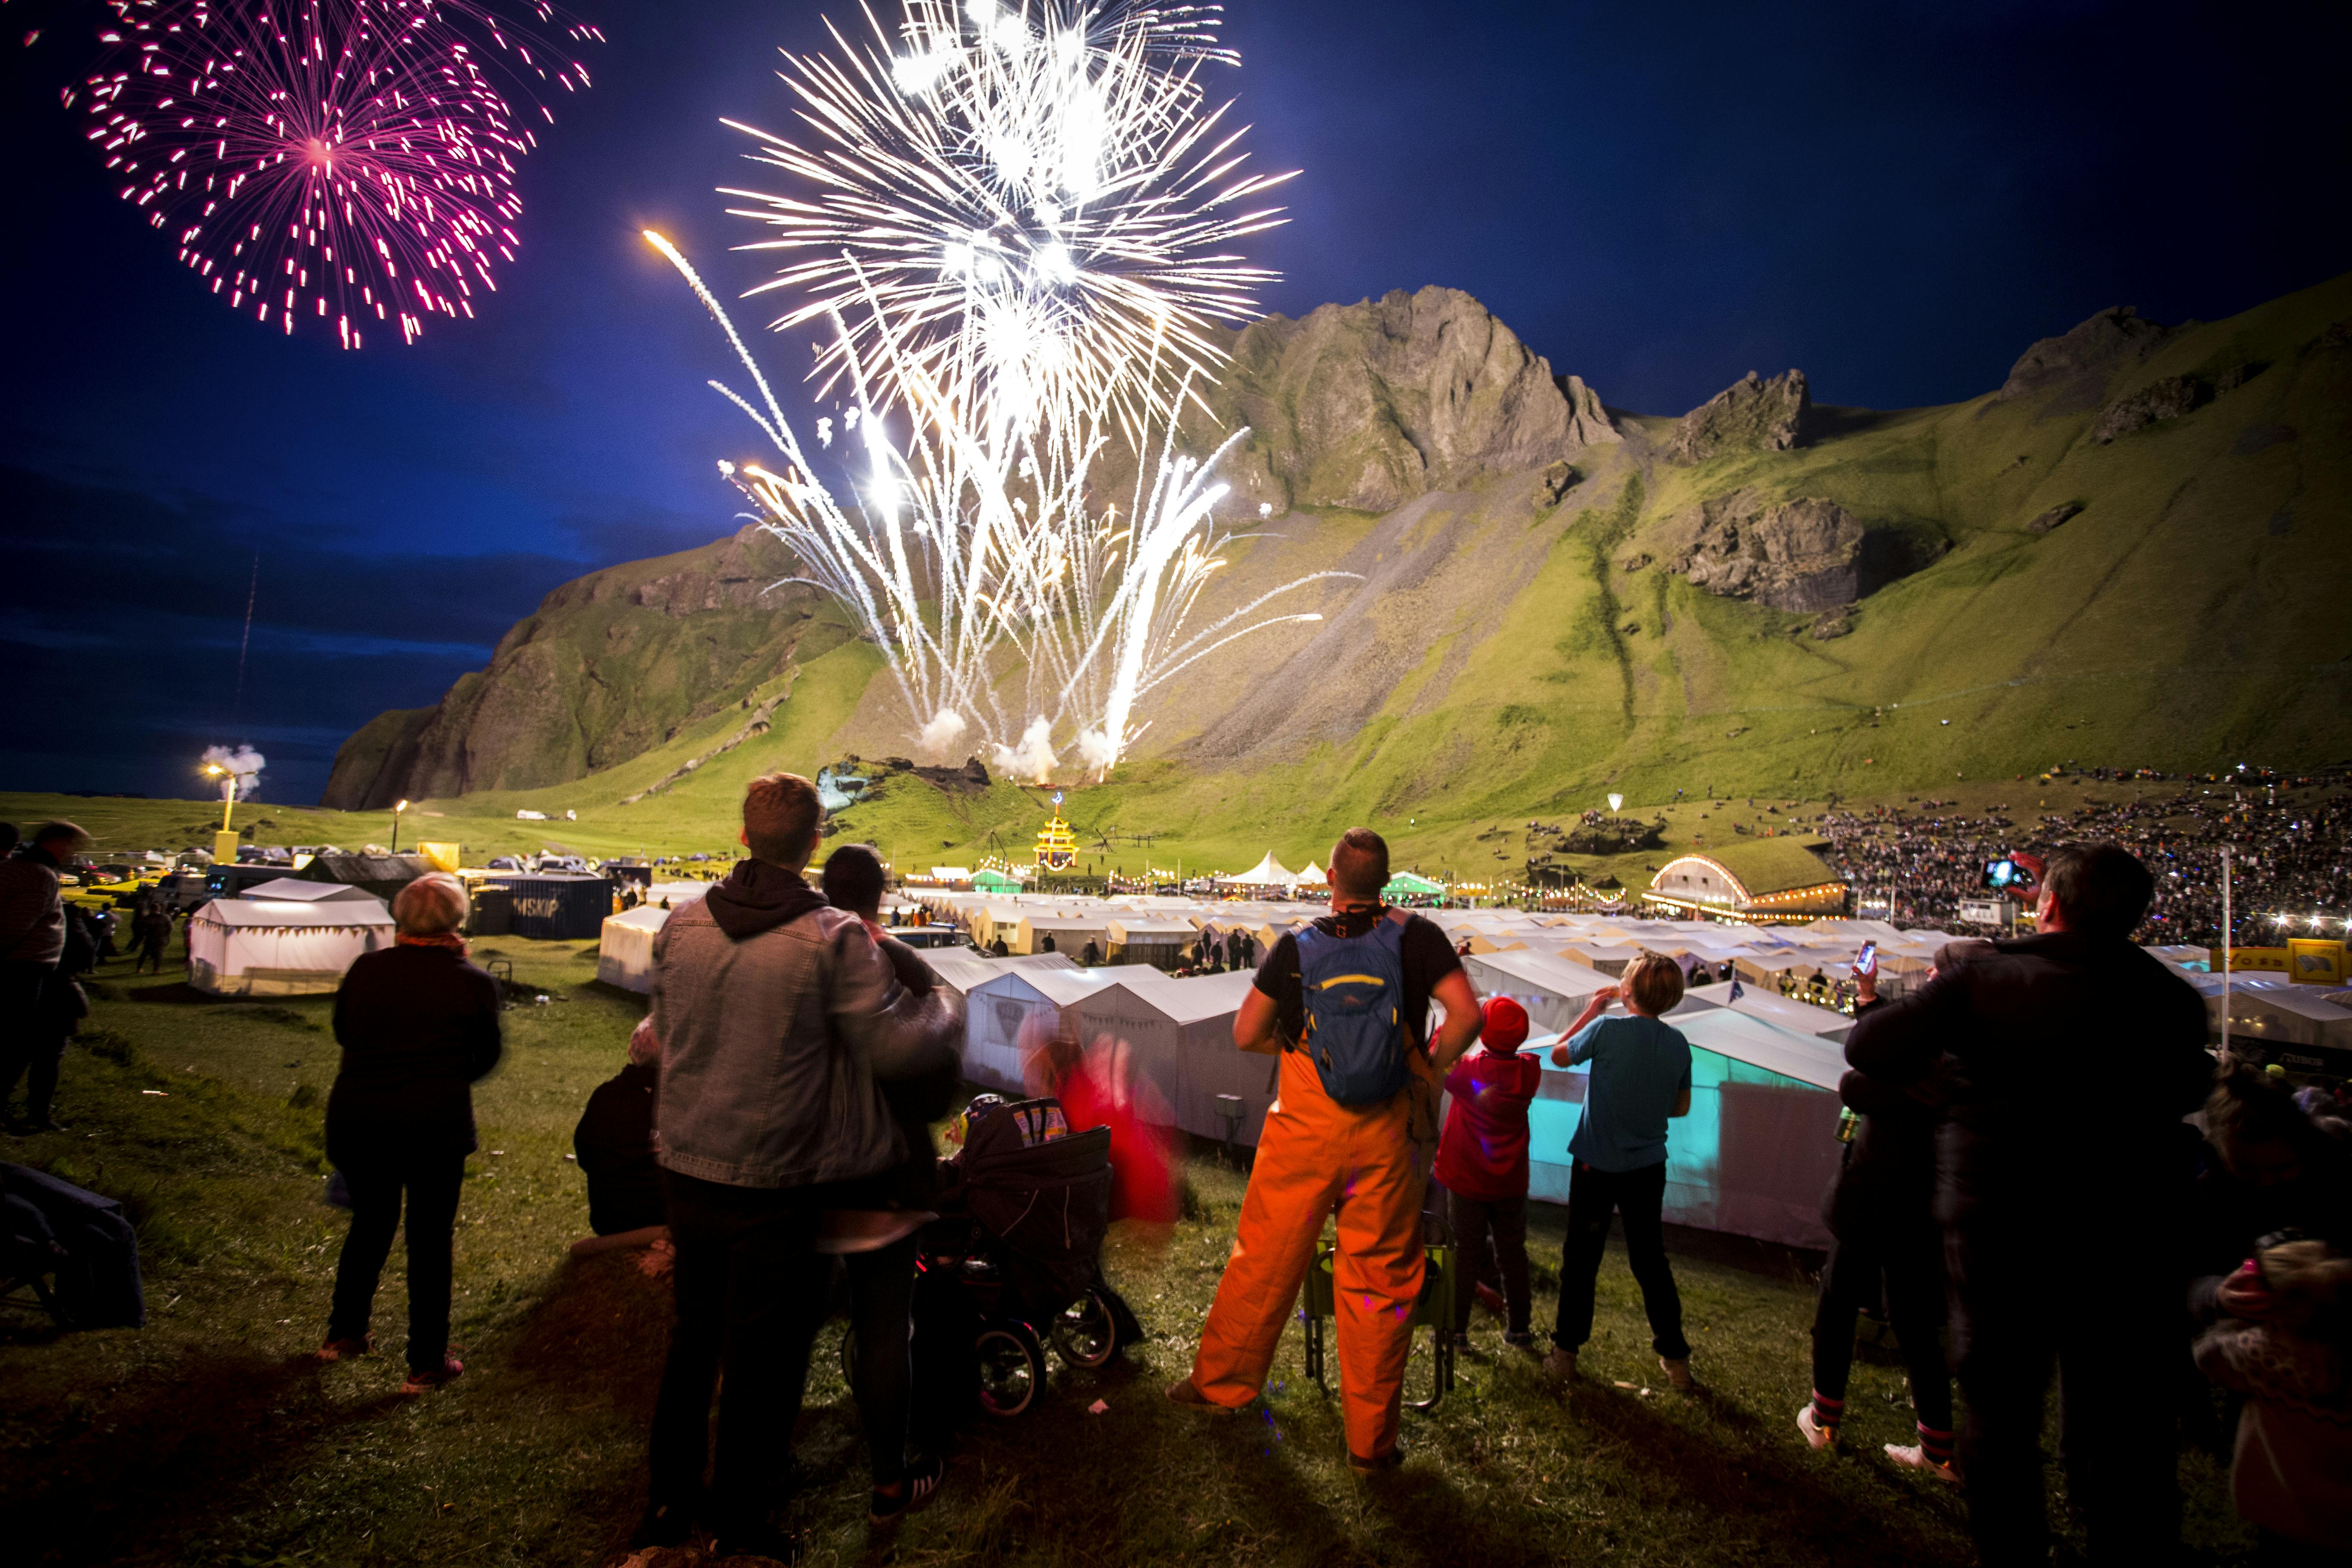 Commerce Day Weekend celebrations in the Westman Islands, Iceland